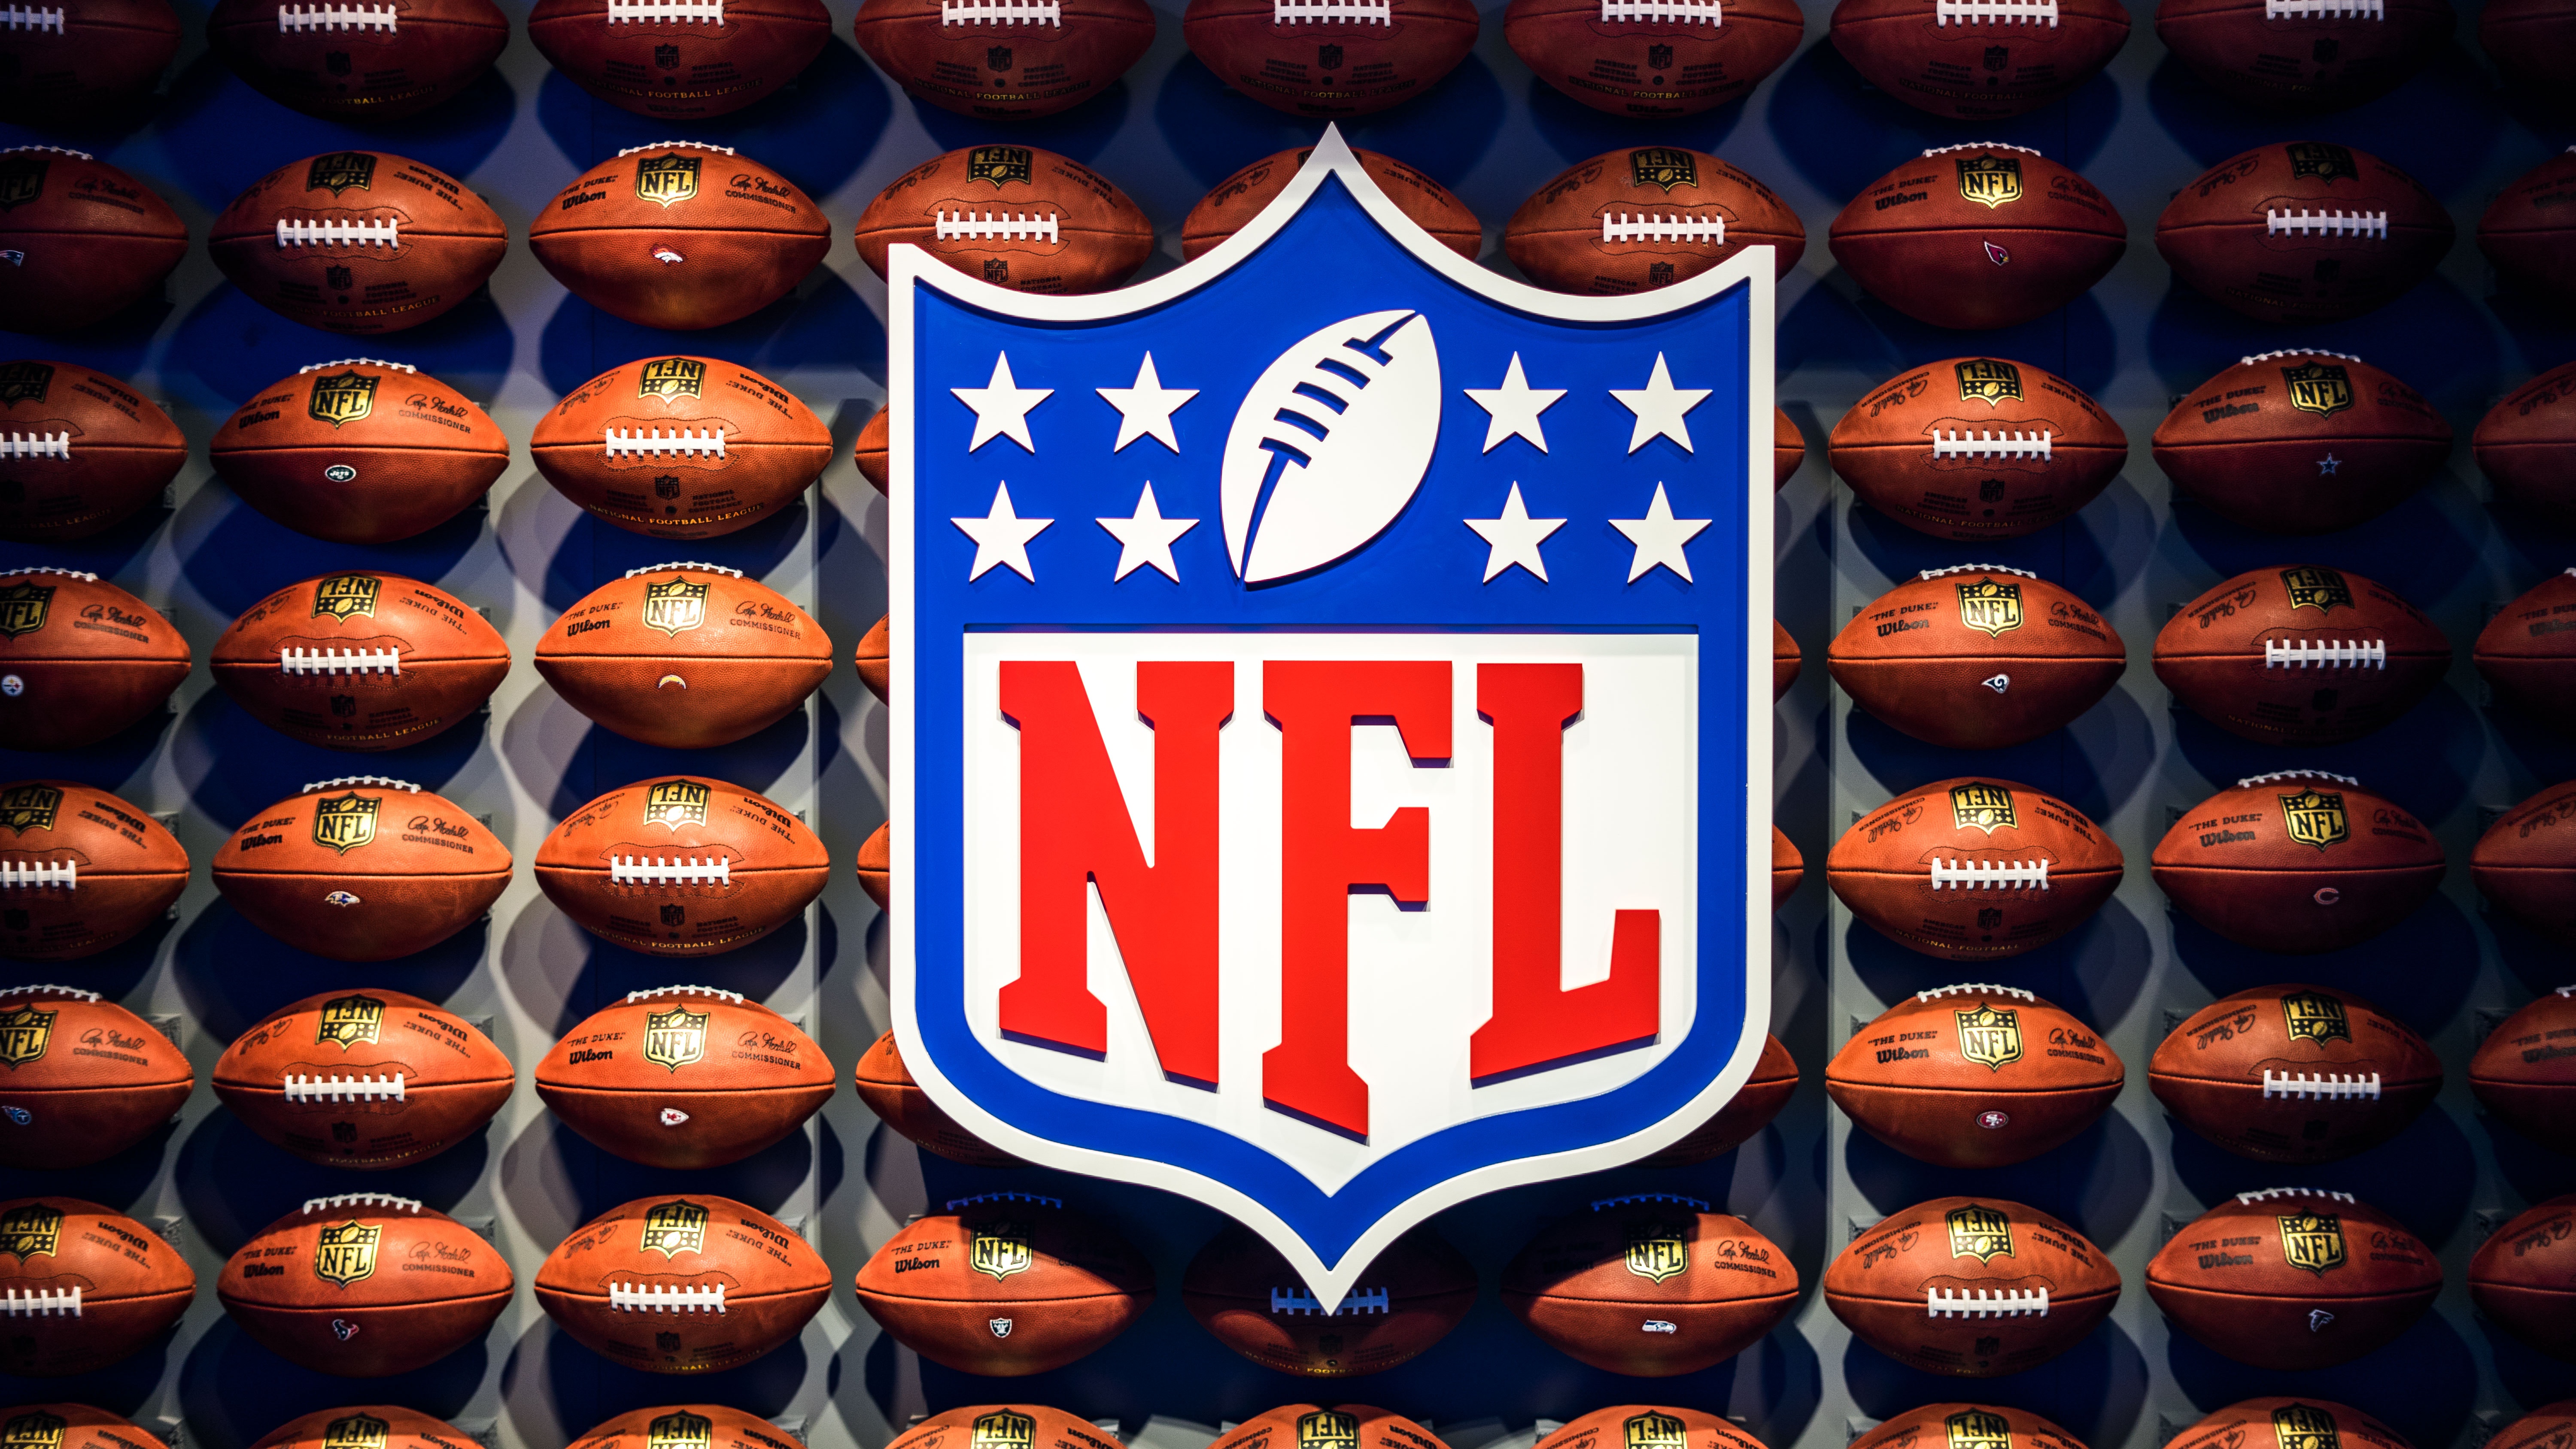 all the nfl games